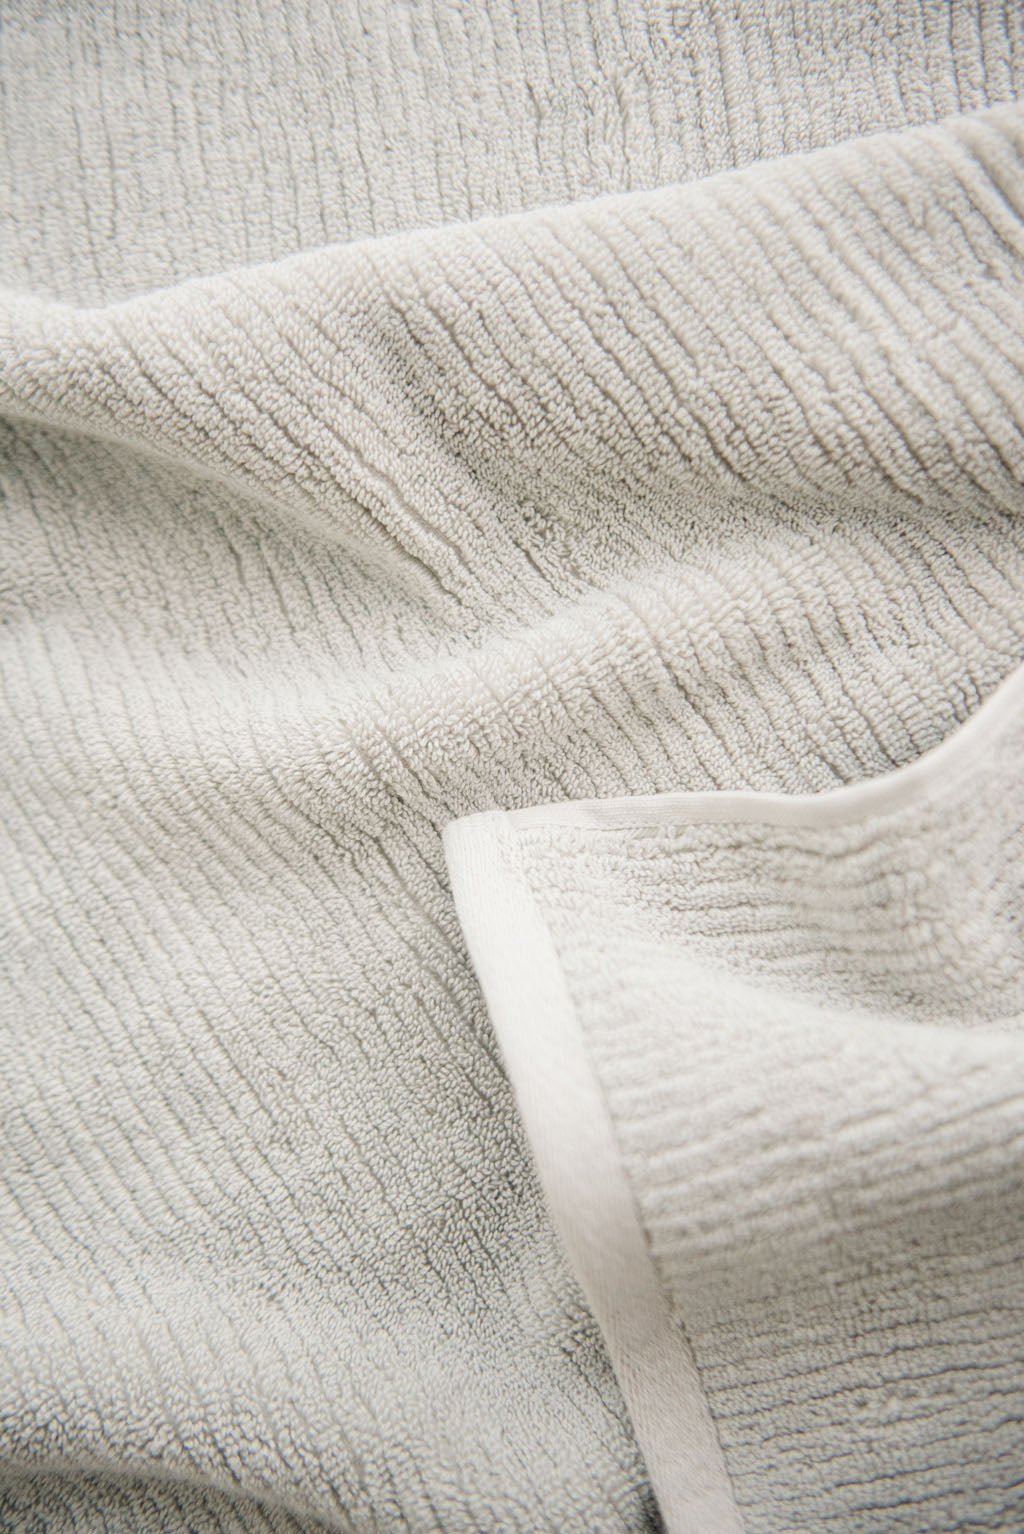 Ribbed Terry Hand Towel in the color Light Grey. Photo of Ribbed Terry Hand Towel taken as a close up of the towel. Only the towel is seen. |Color:Light Grey